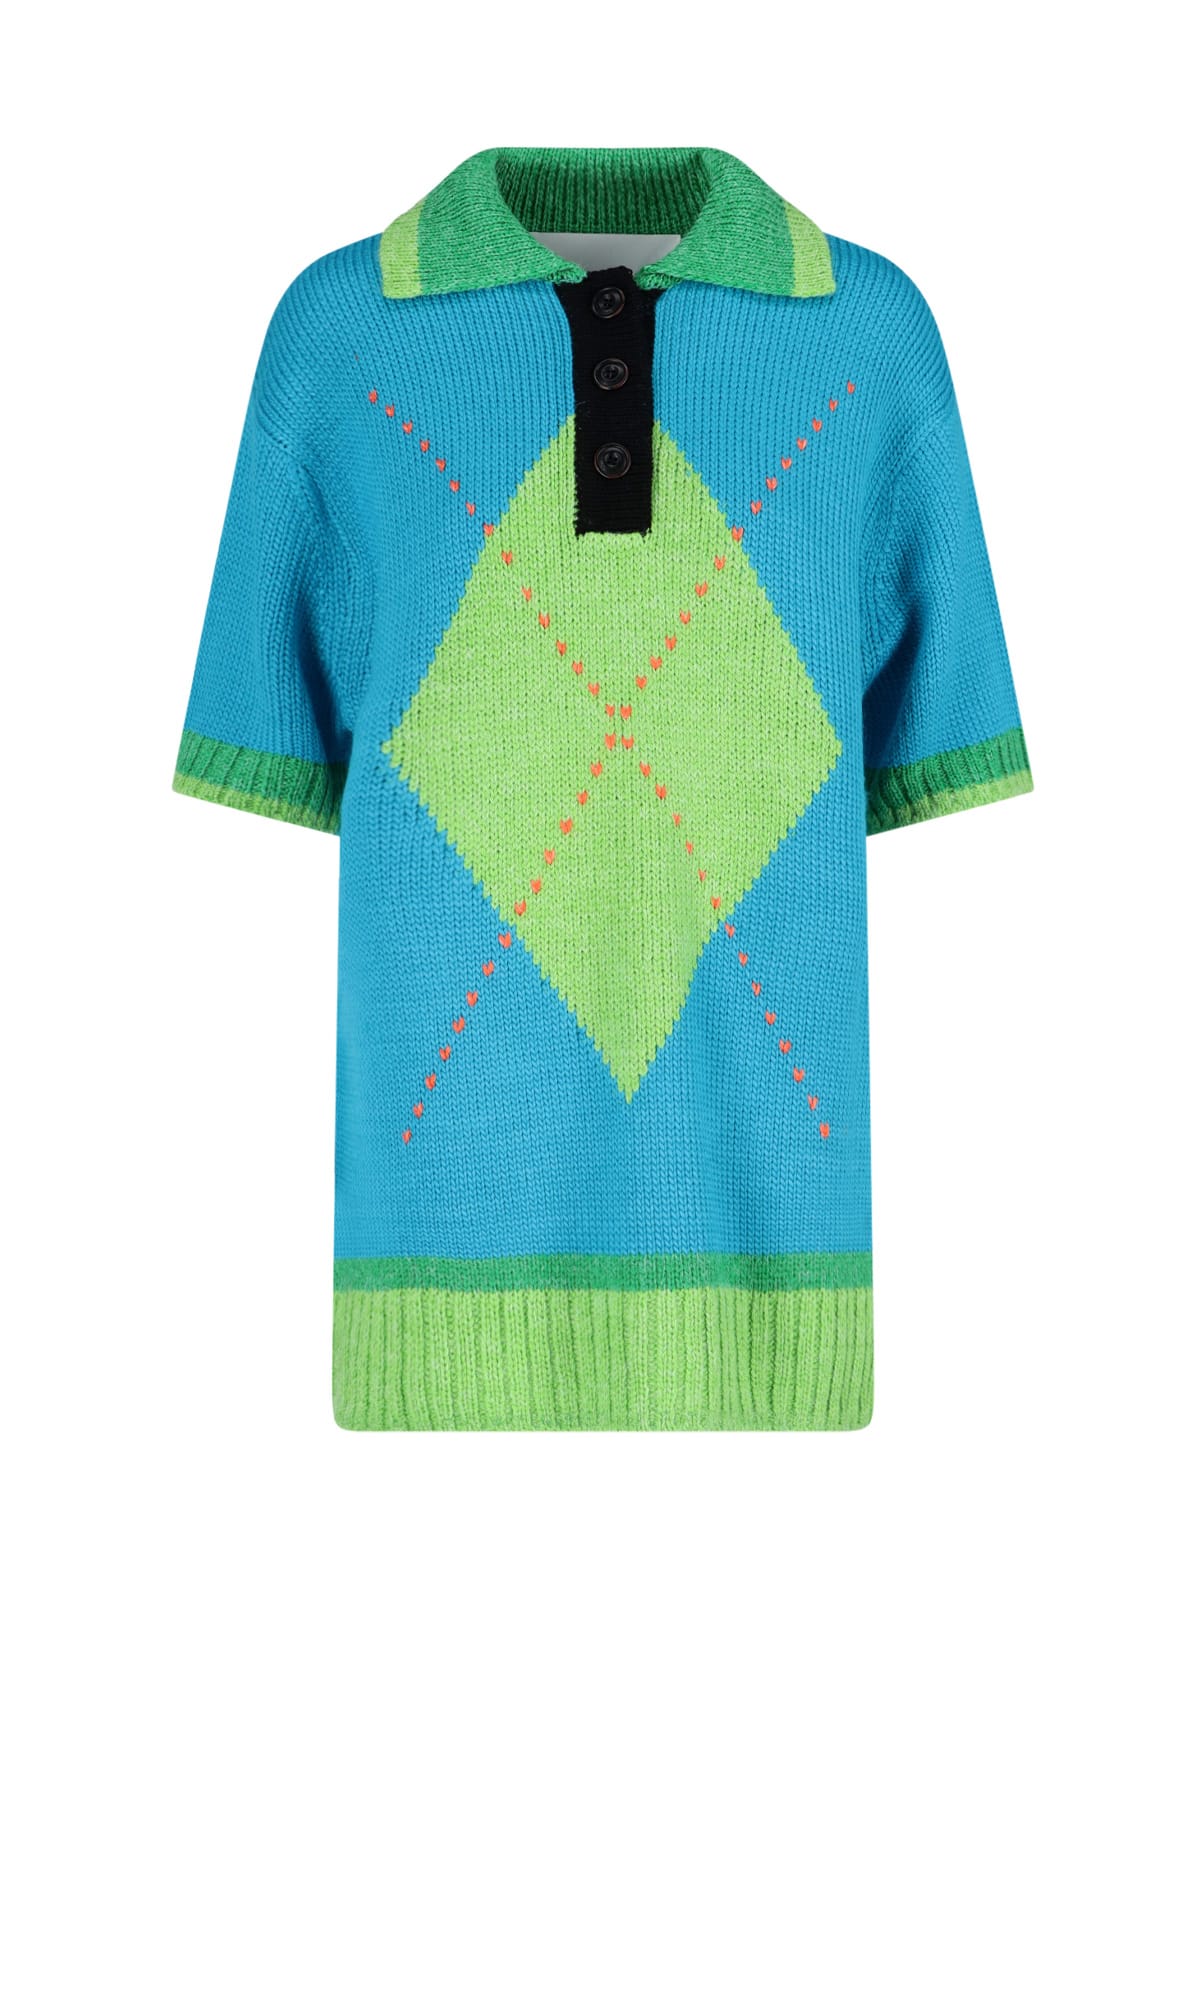 Andersson Bell Sweater